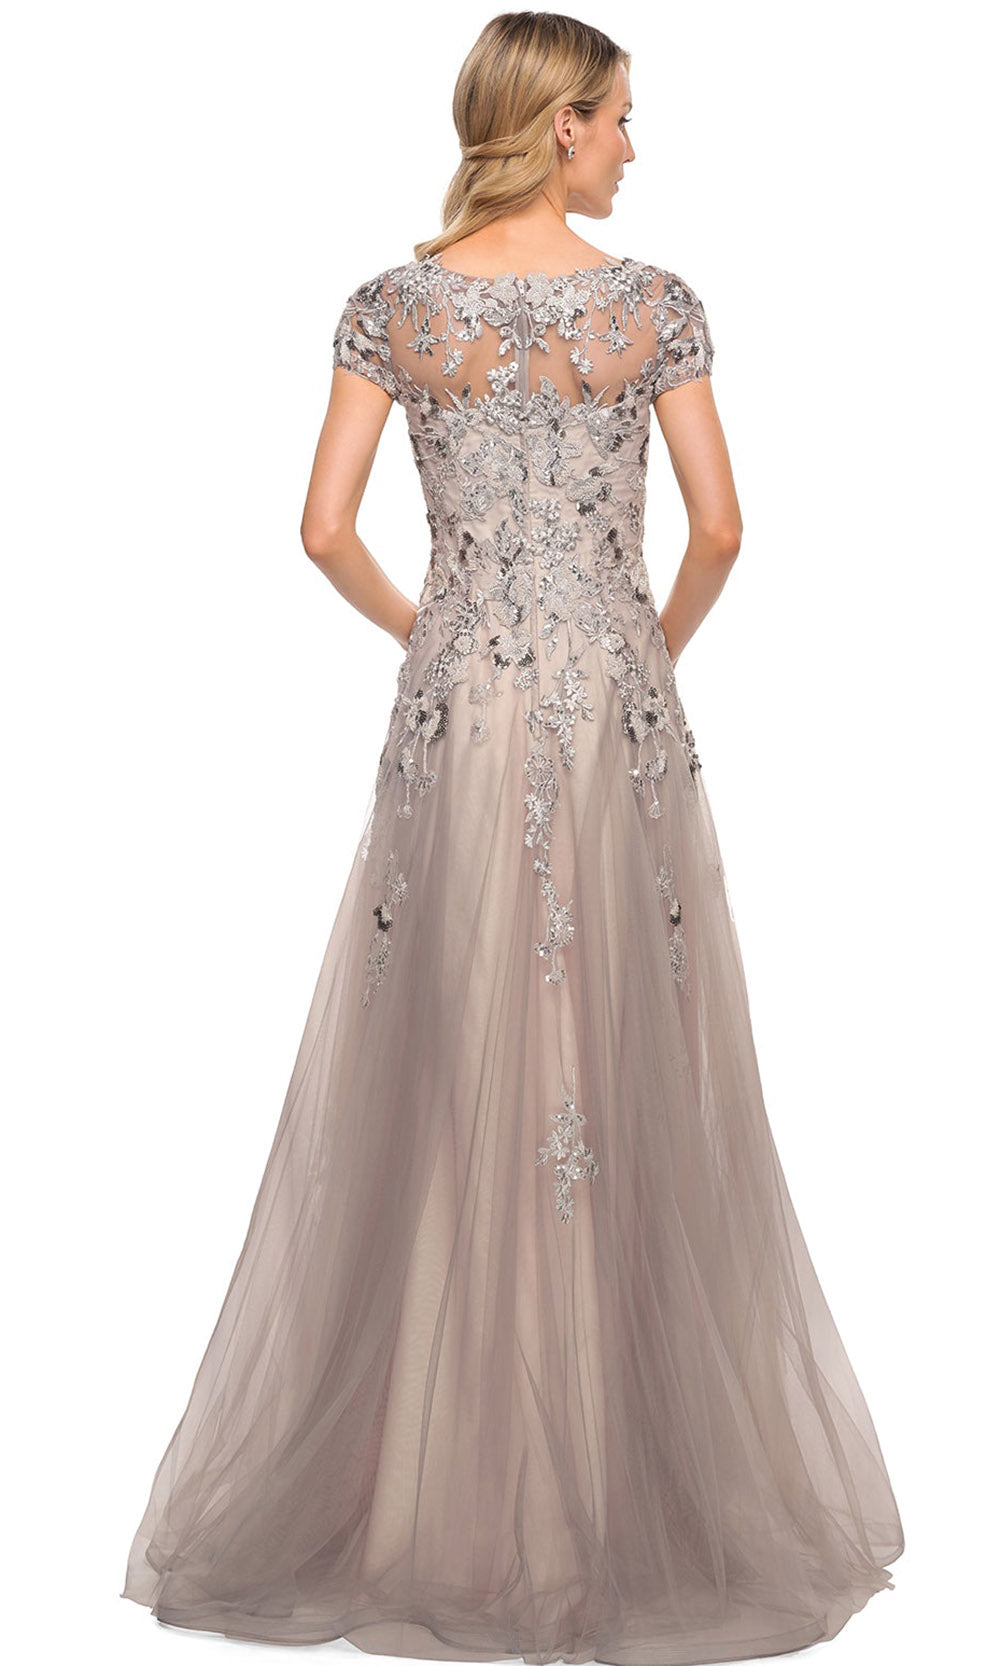 La Femme - 30239 Embellished Sheer Lace A-Line Dress In Silver and Pink